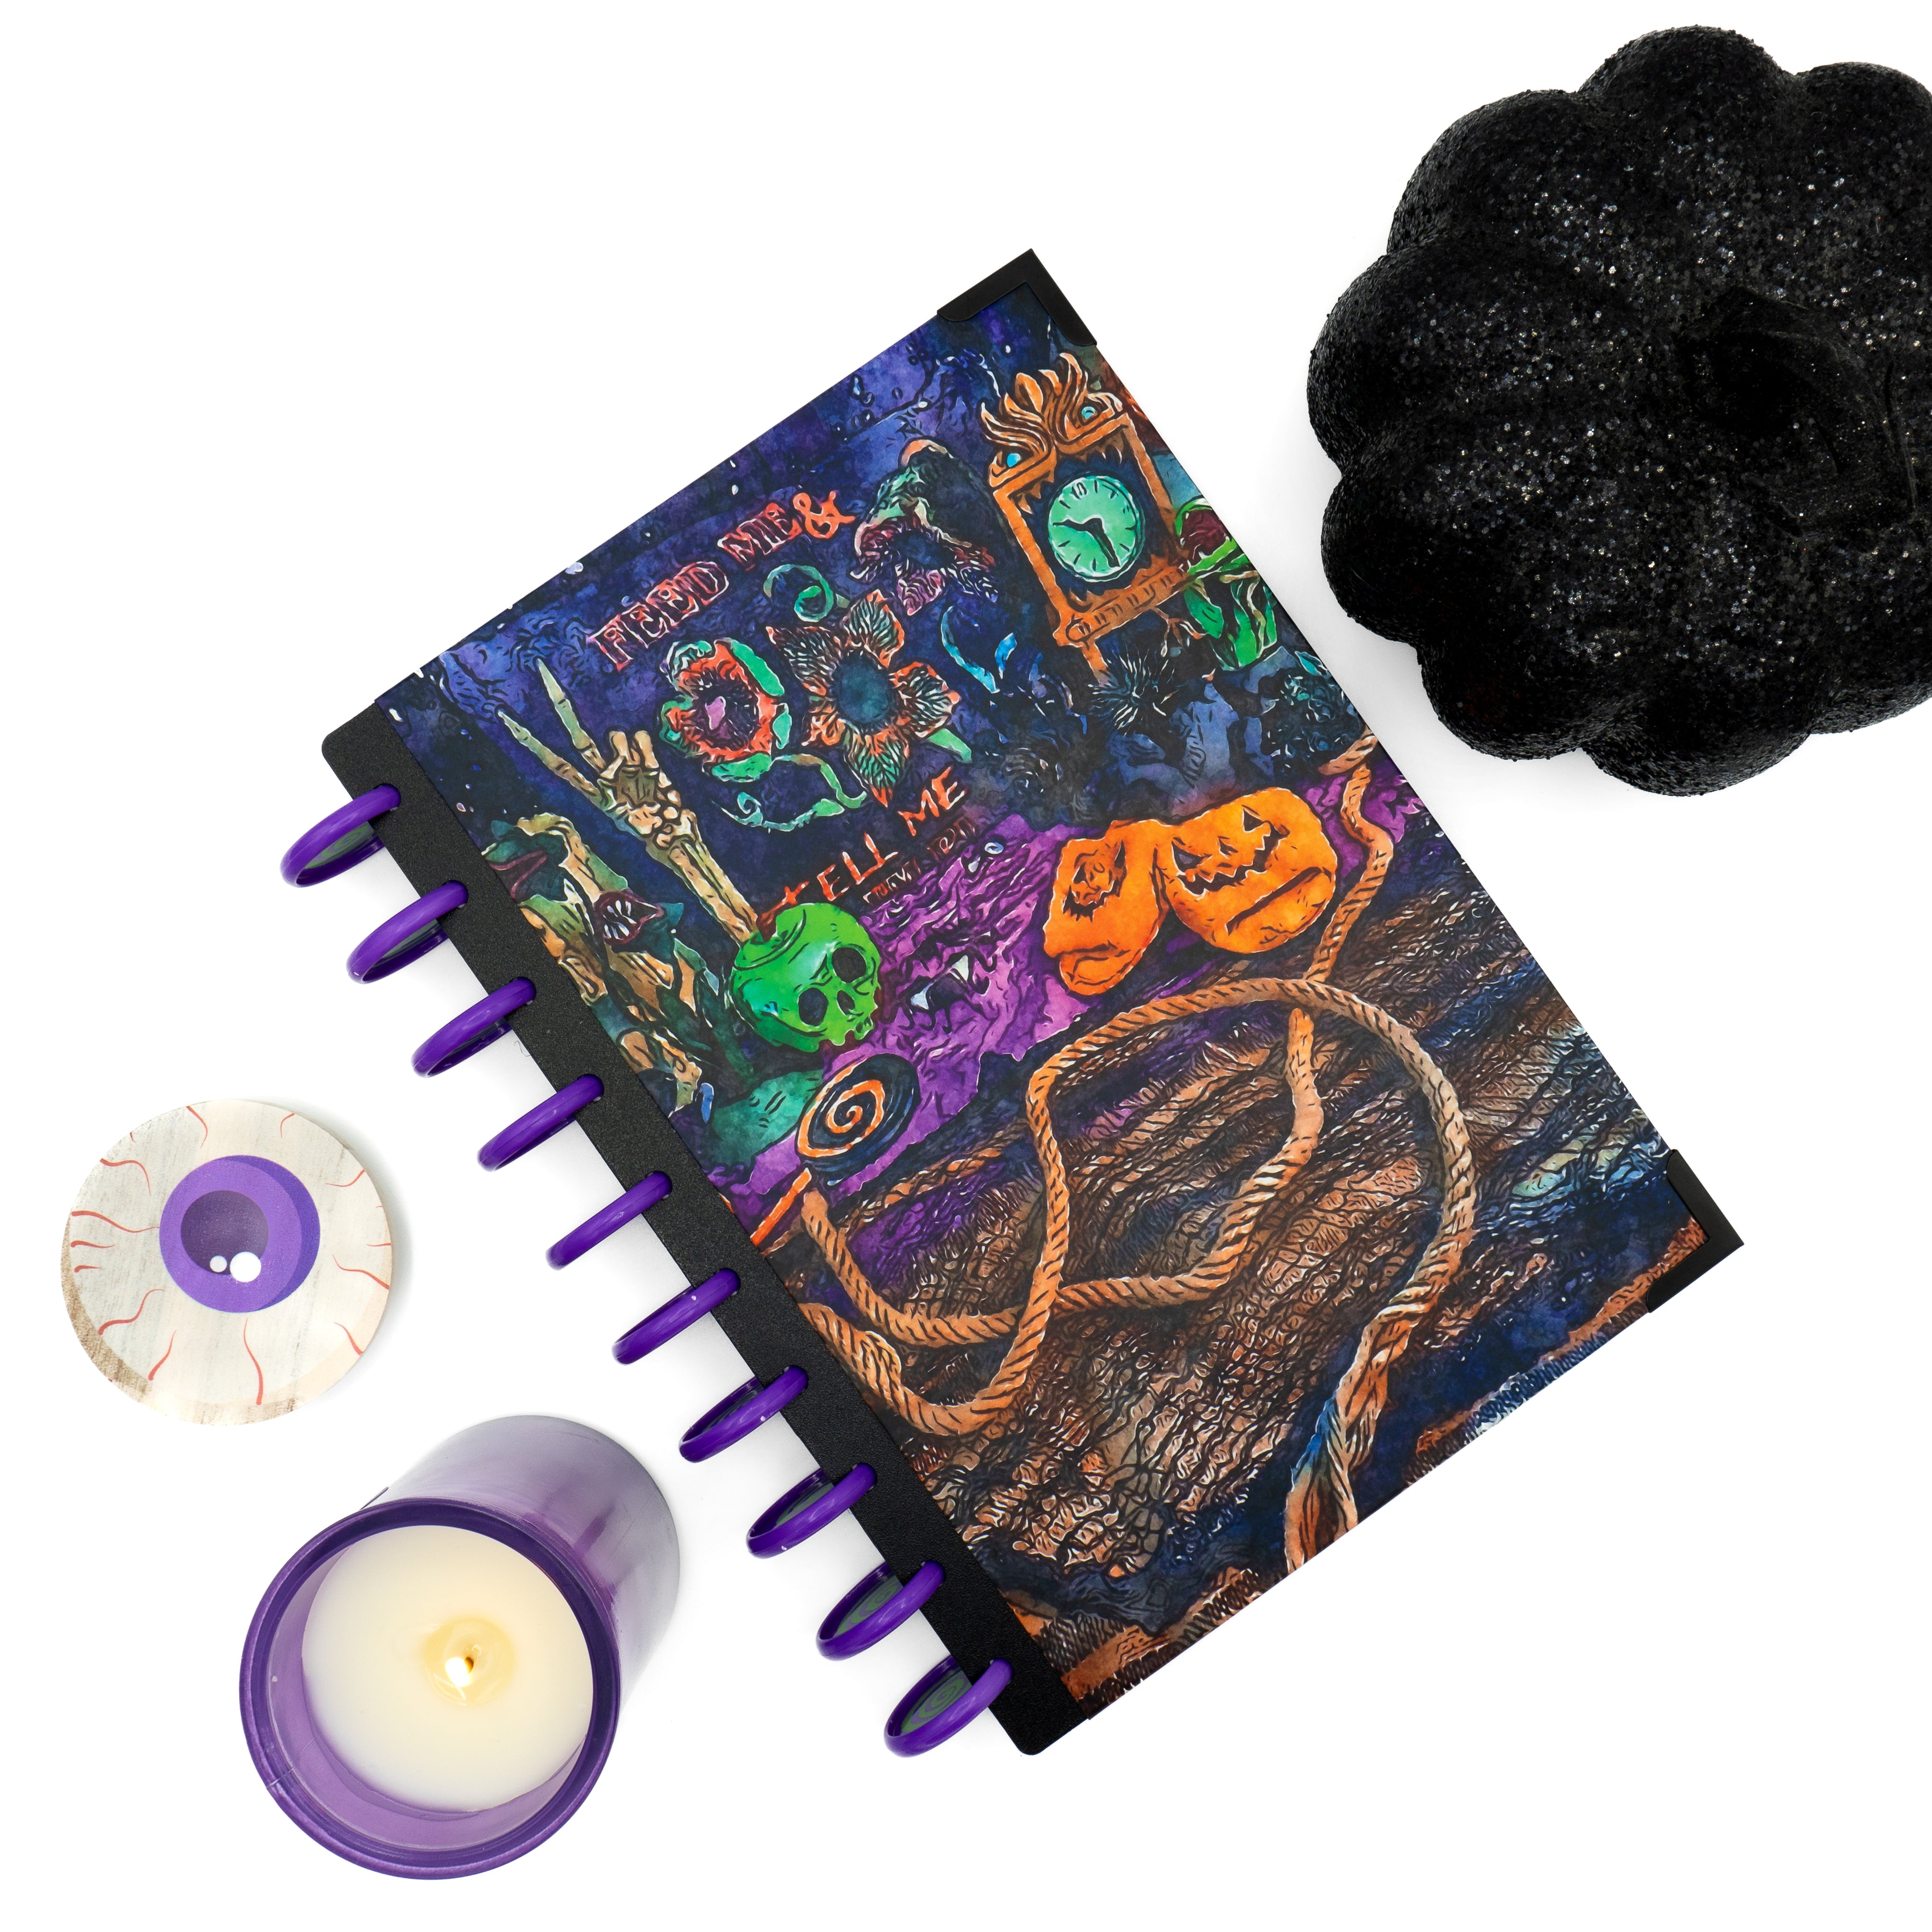 Clip-in Daily Grind Planner Cover | Witches Brew